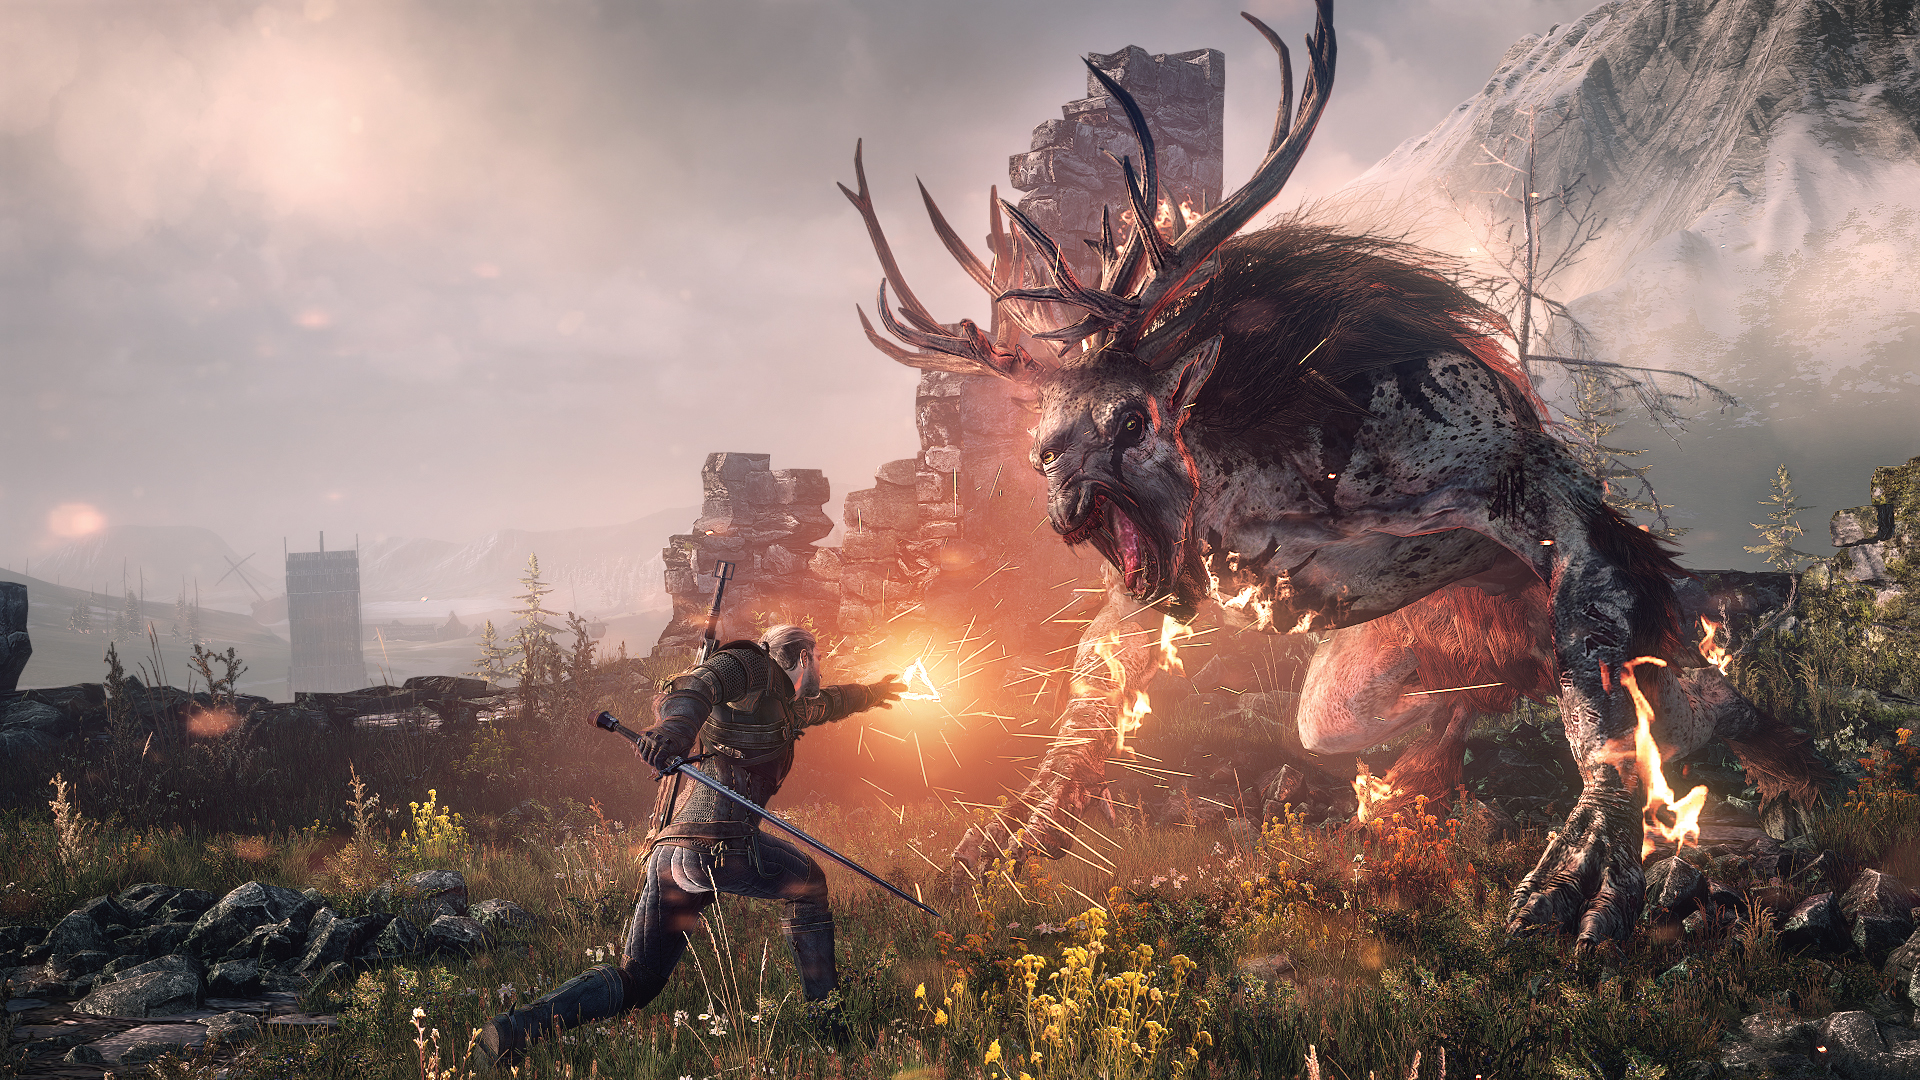 New Game Plus DLC For Witcher 3 Out Now